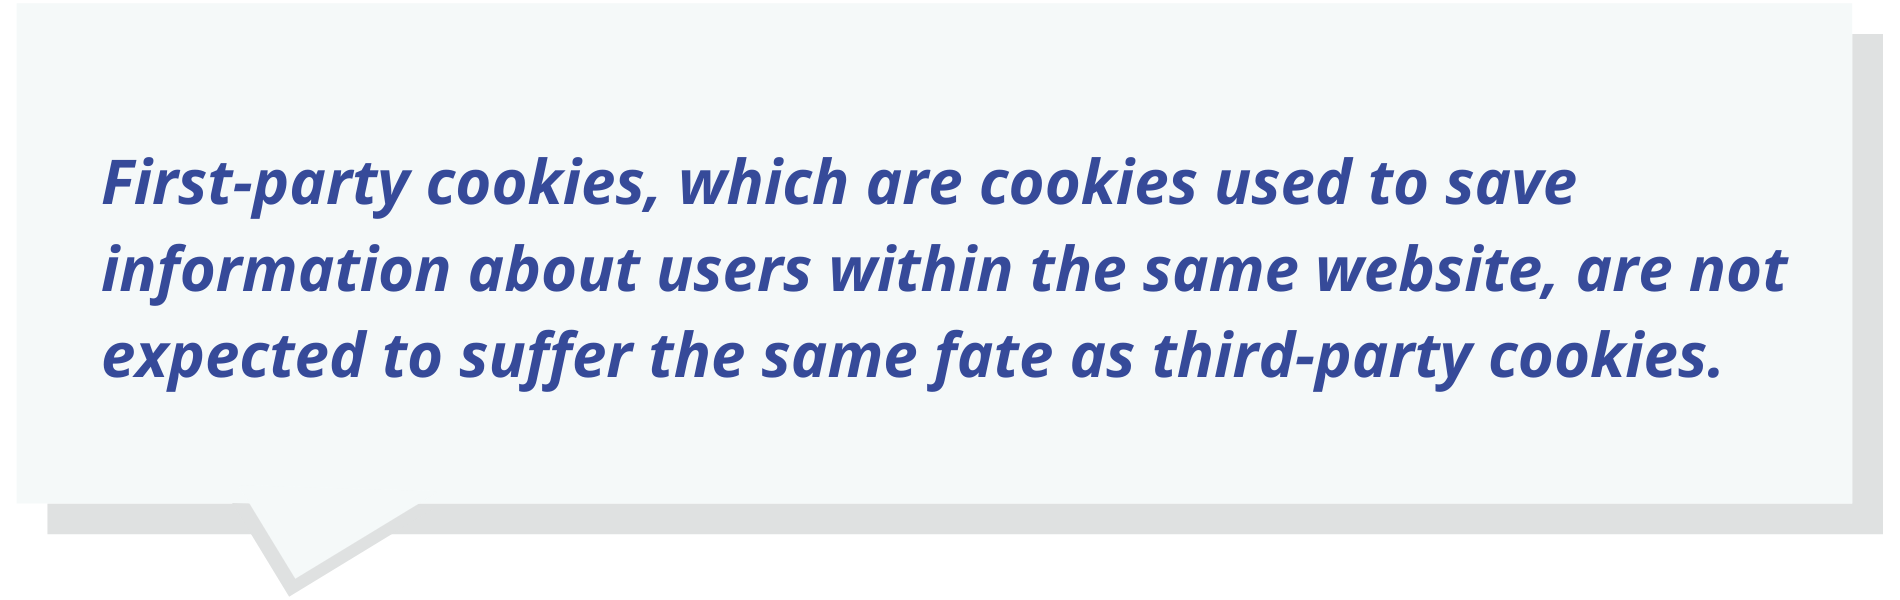 First-party cookies, which are cookies used to save information about users within the same website, are not expected to suffer the same fate as third-party cookies.